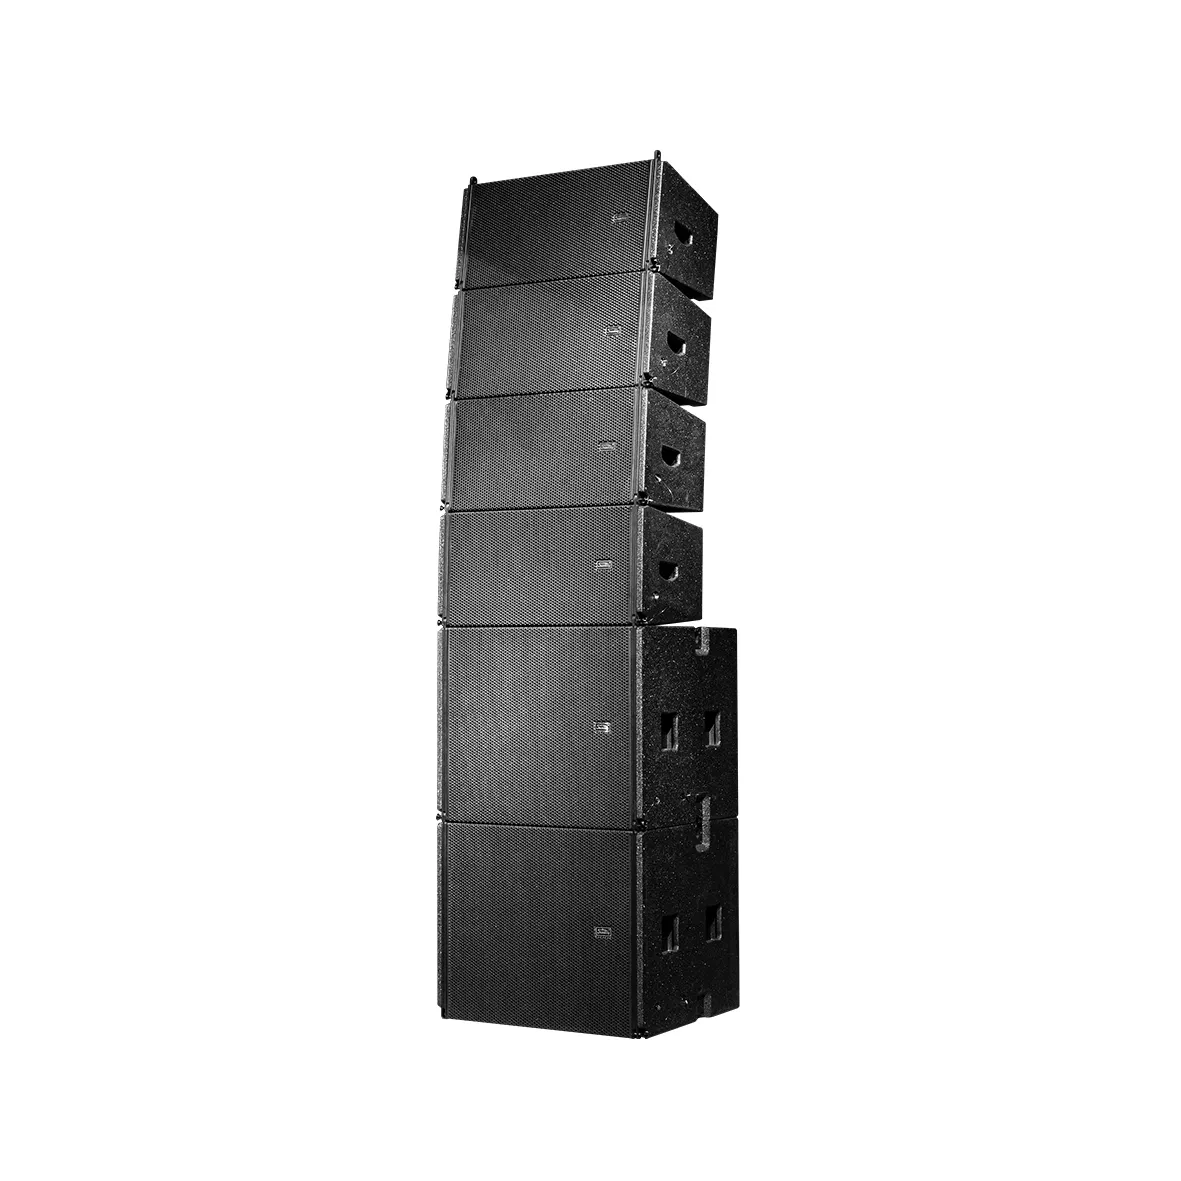 G312A 3-way active line array speaker (more powerful sound, smaller size)